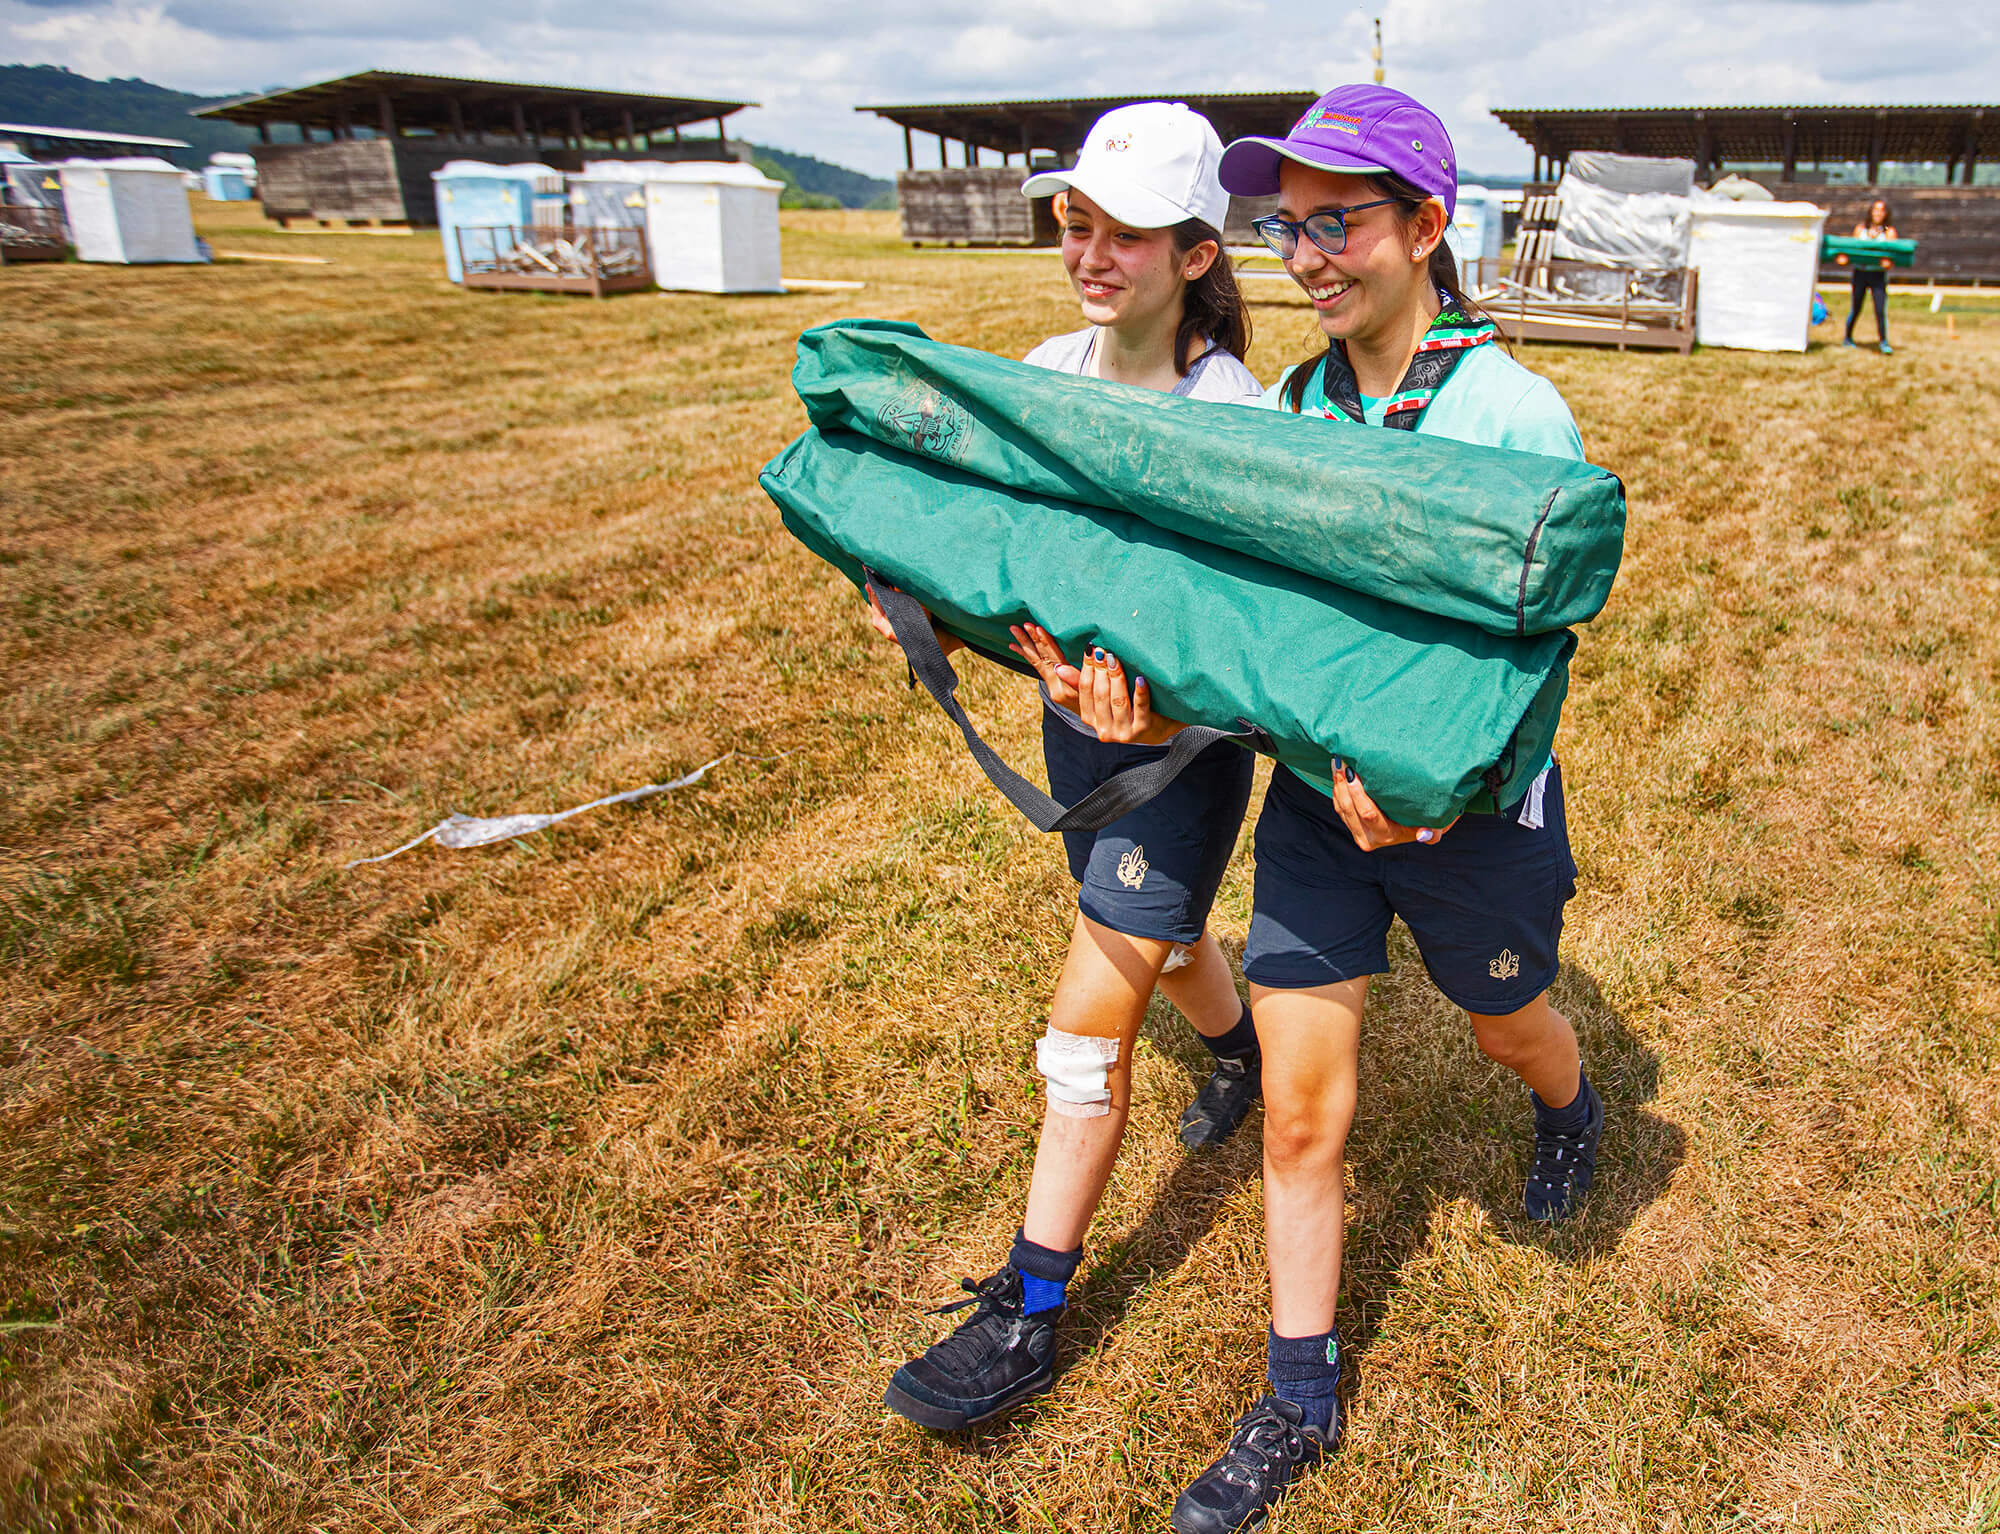 Two Scouts Carrying Equipment on Camp School and Qualifications from Scouting